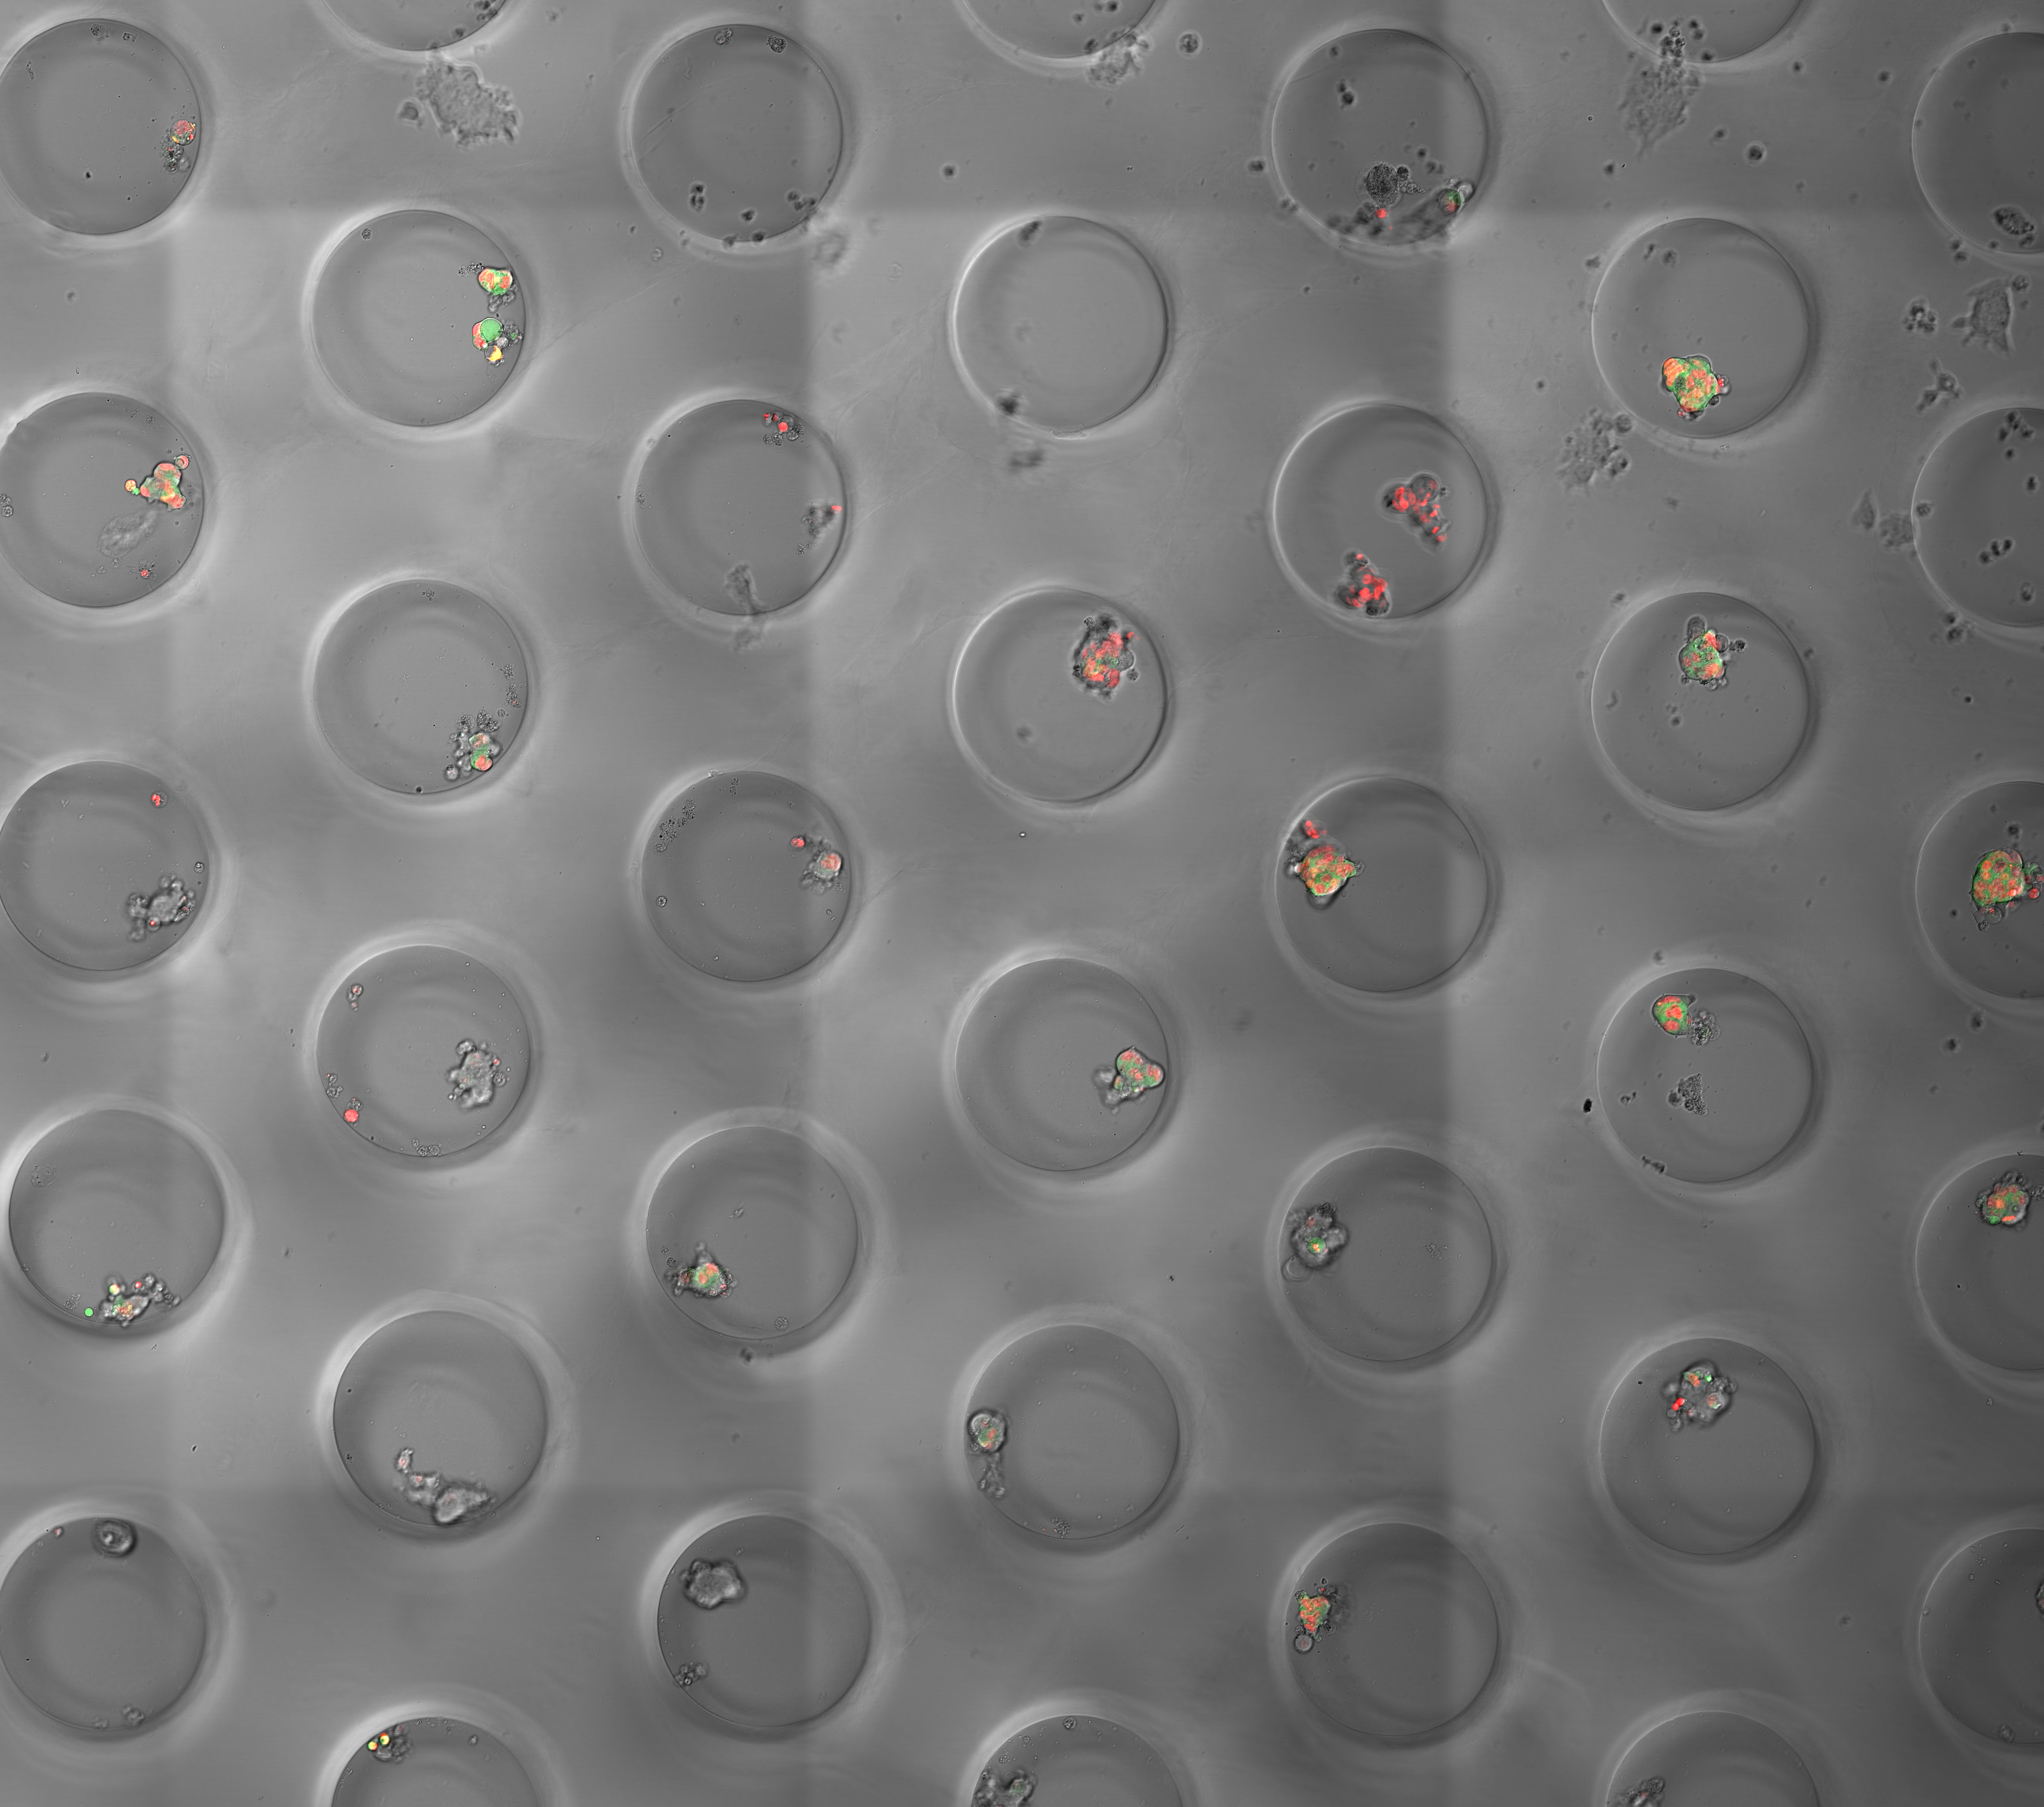 Agarose MicroWell Array filled with Mouse Embryonic Stem Cells growing in 3D conditions